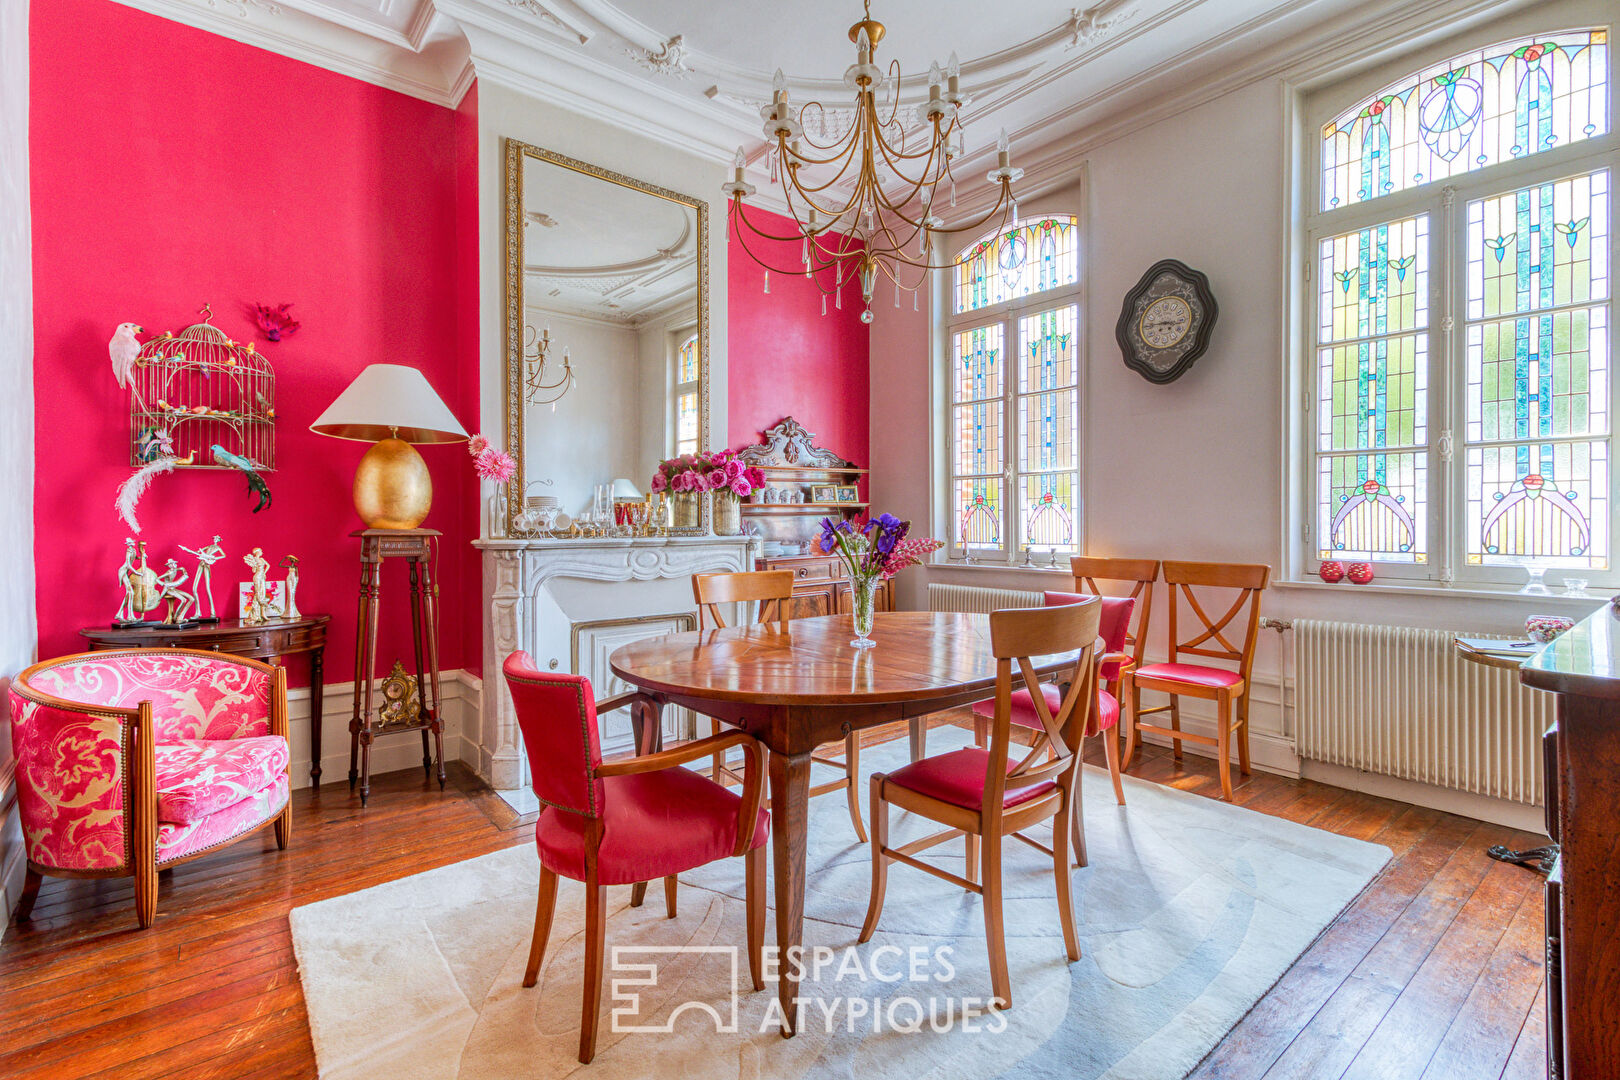 Superb 19th century mansion: ideal for a guest house or family property.